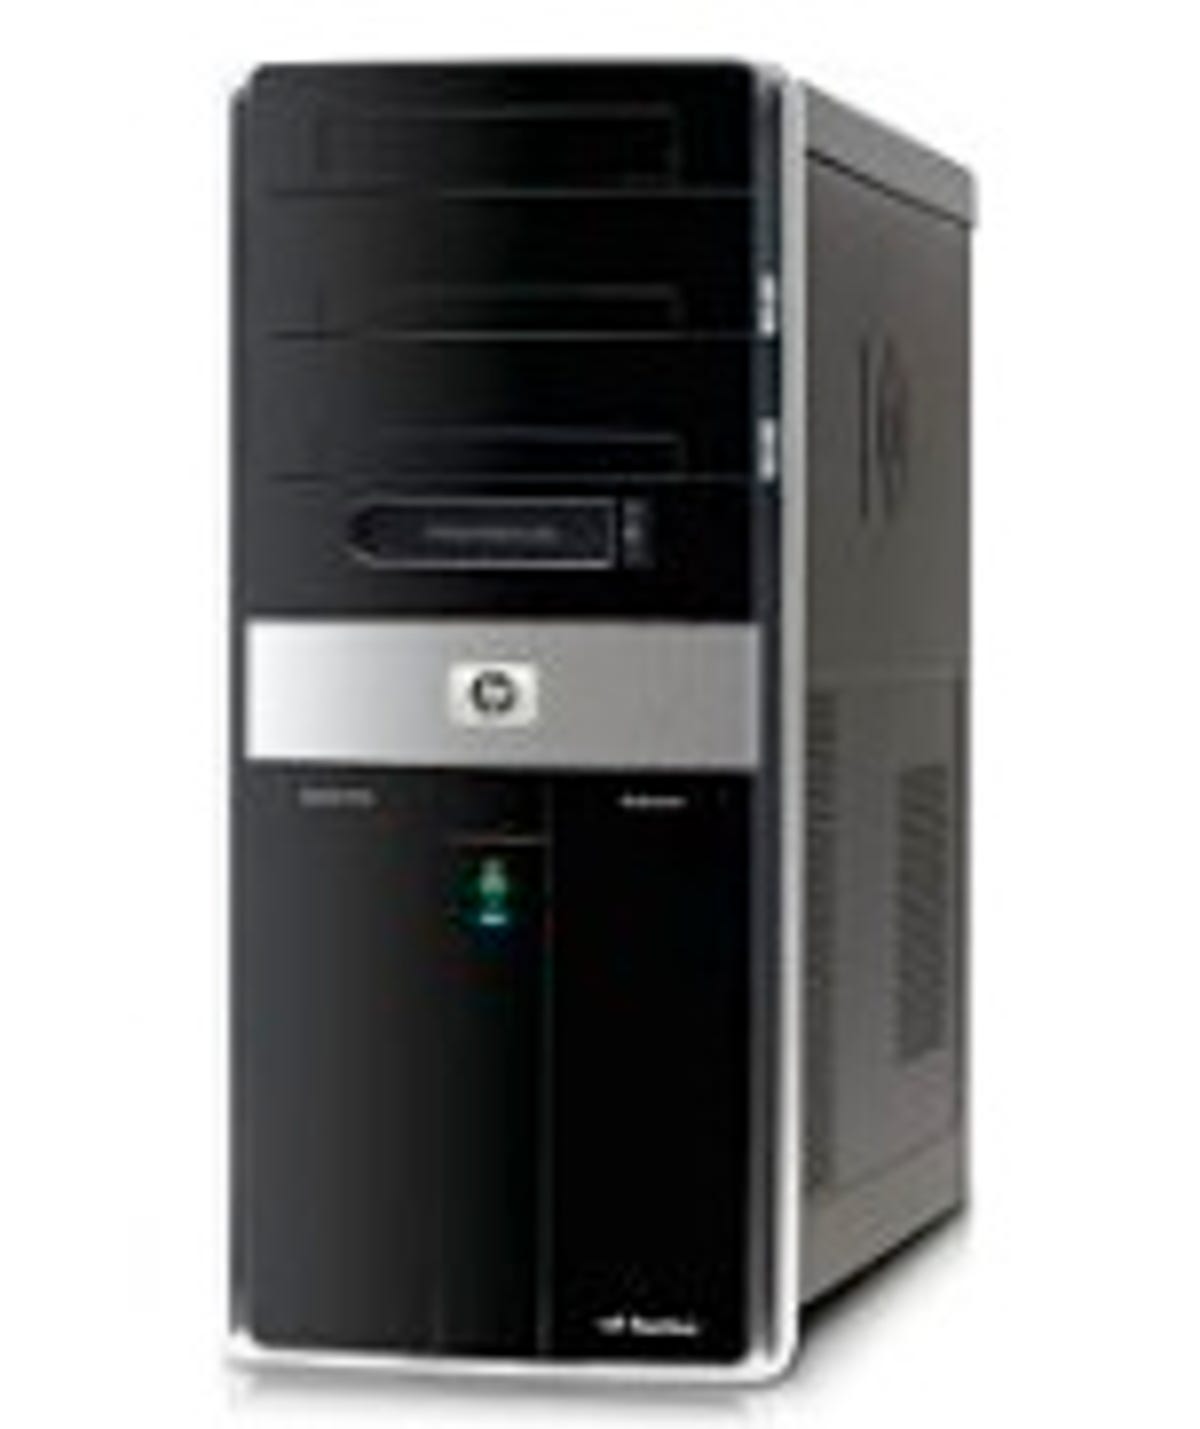 HP m9600T features top-of-the-line Core i7 975